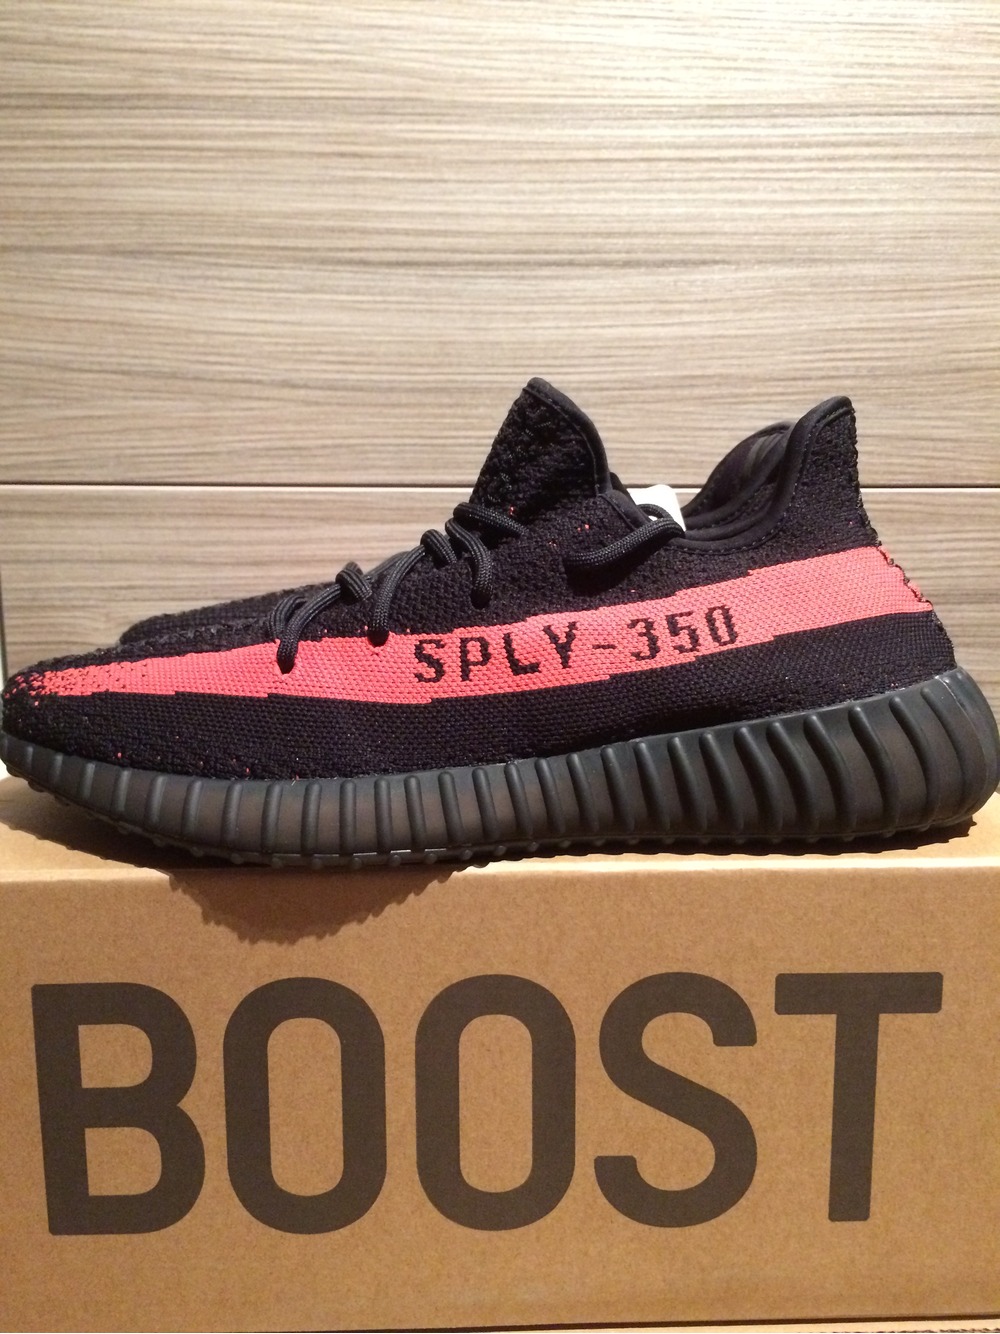 Adidas yeezy boost low 350 v2 sply kanye west black red BY 9612 new